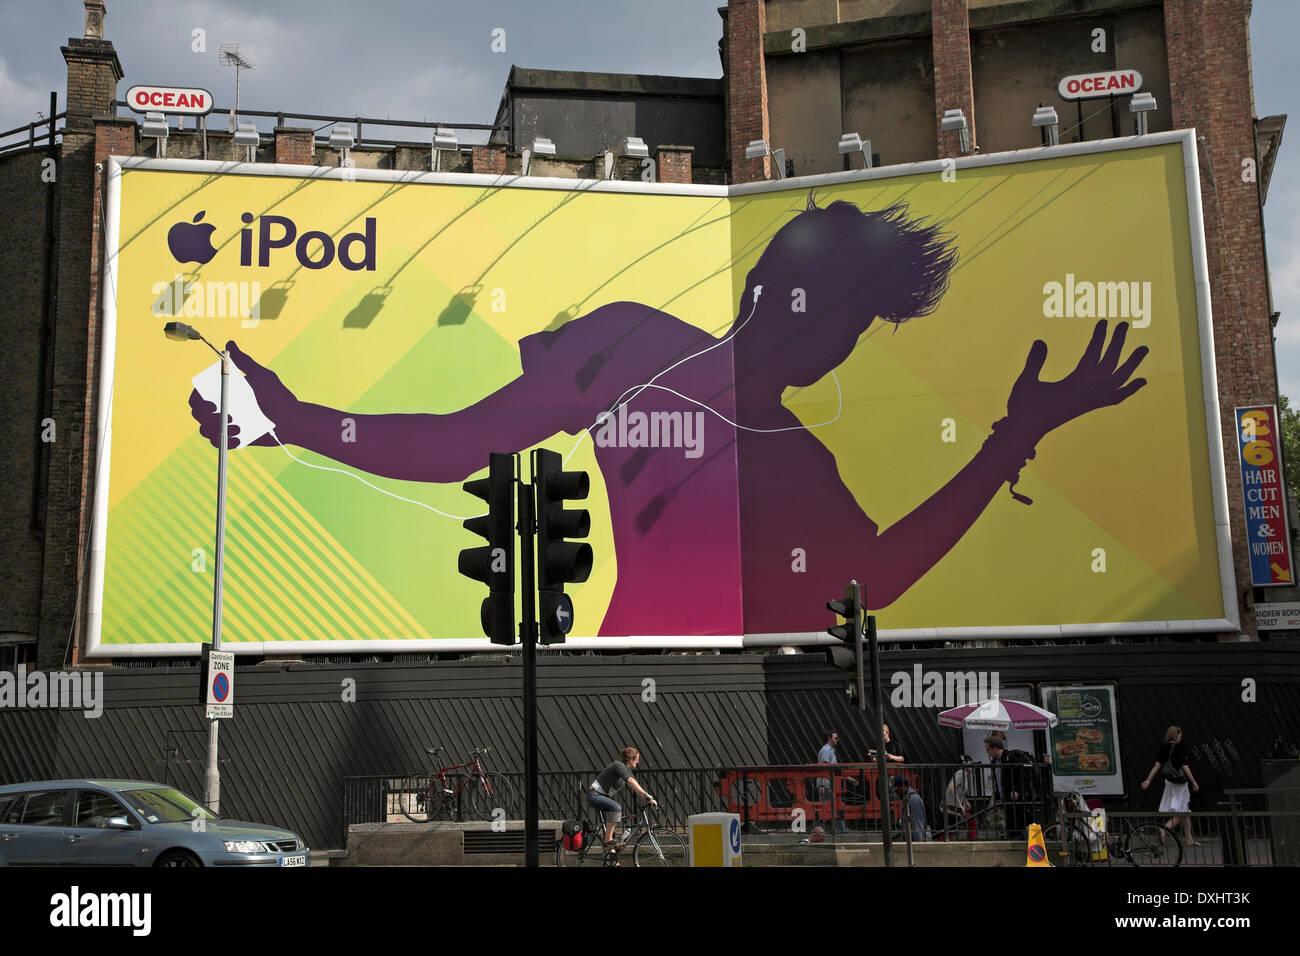 Huge bill board advertising poster for Apple iPod in central London, England Stock Photo